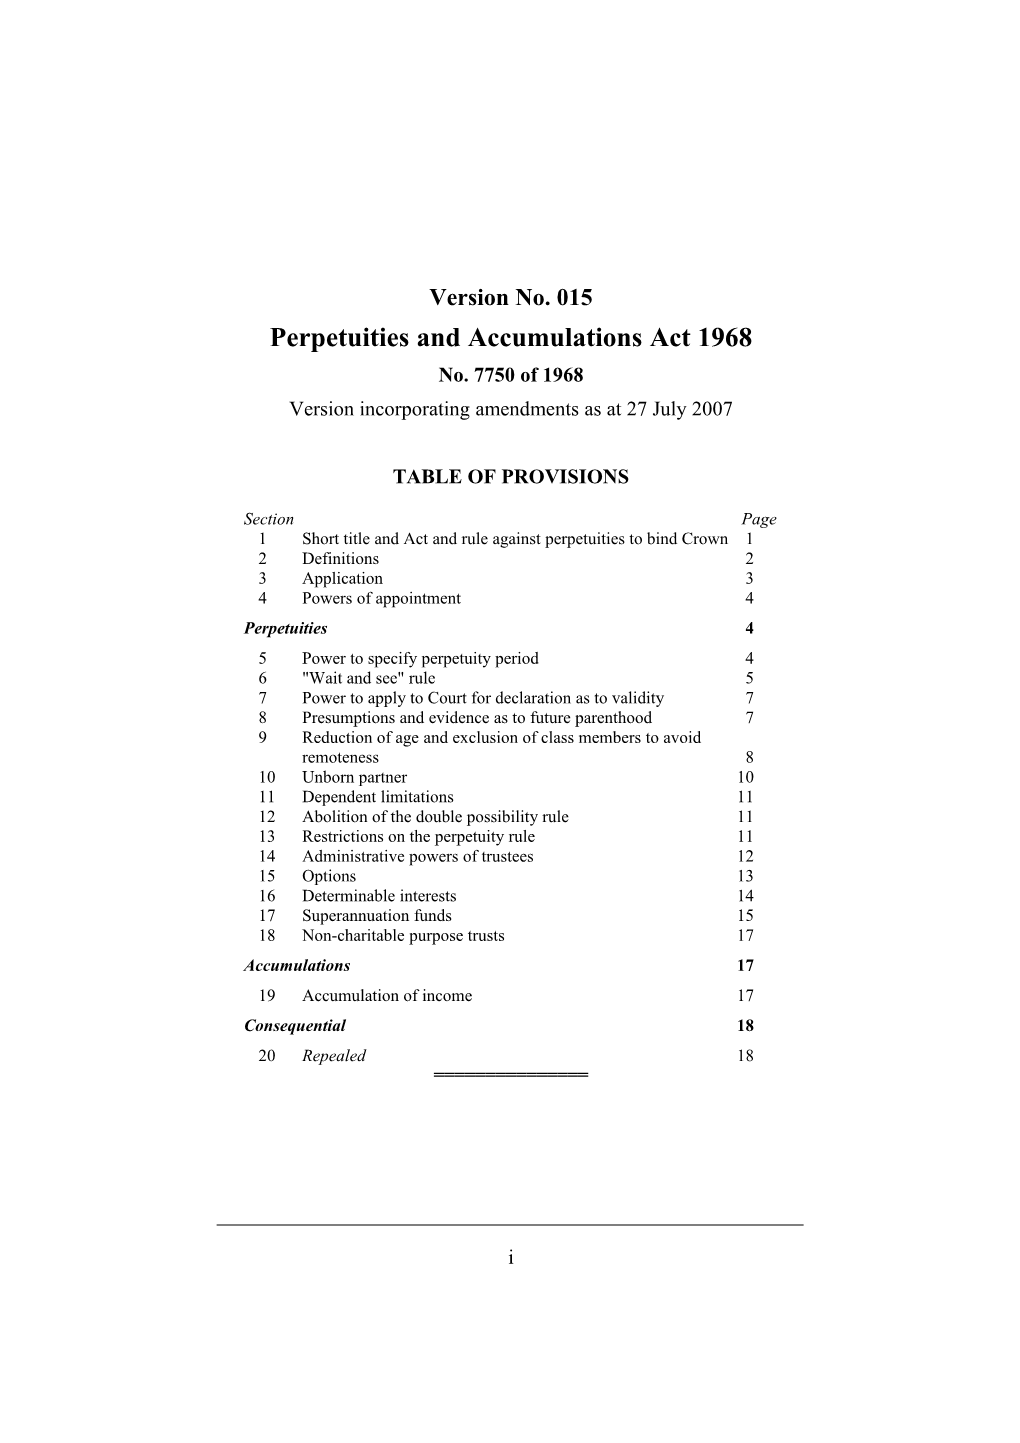 Perpetuities and Accumulations Act 1968